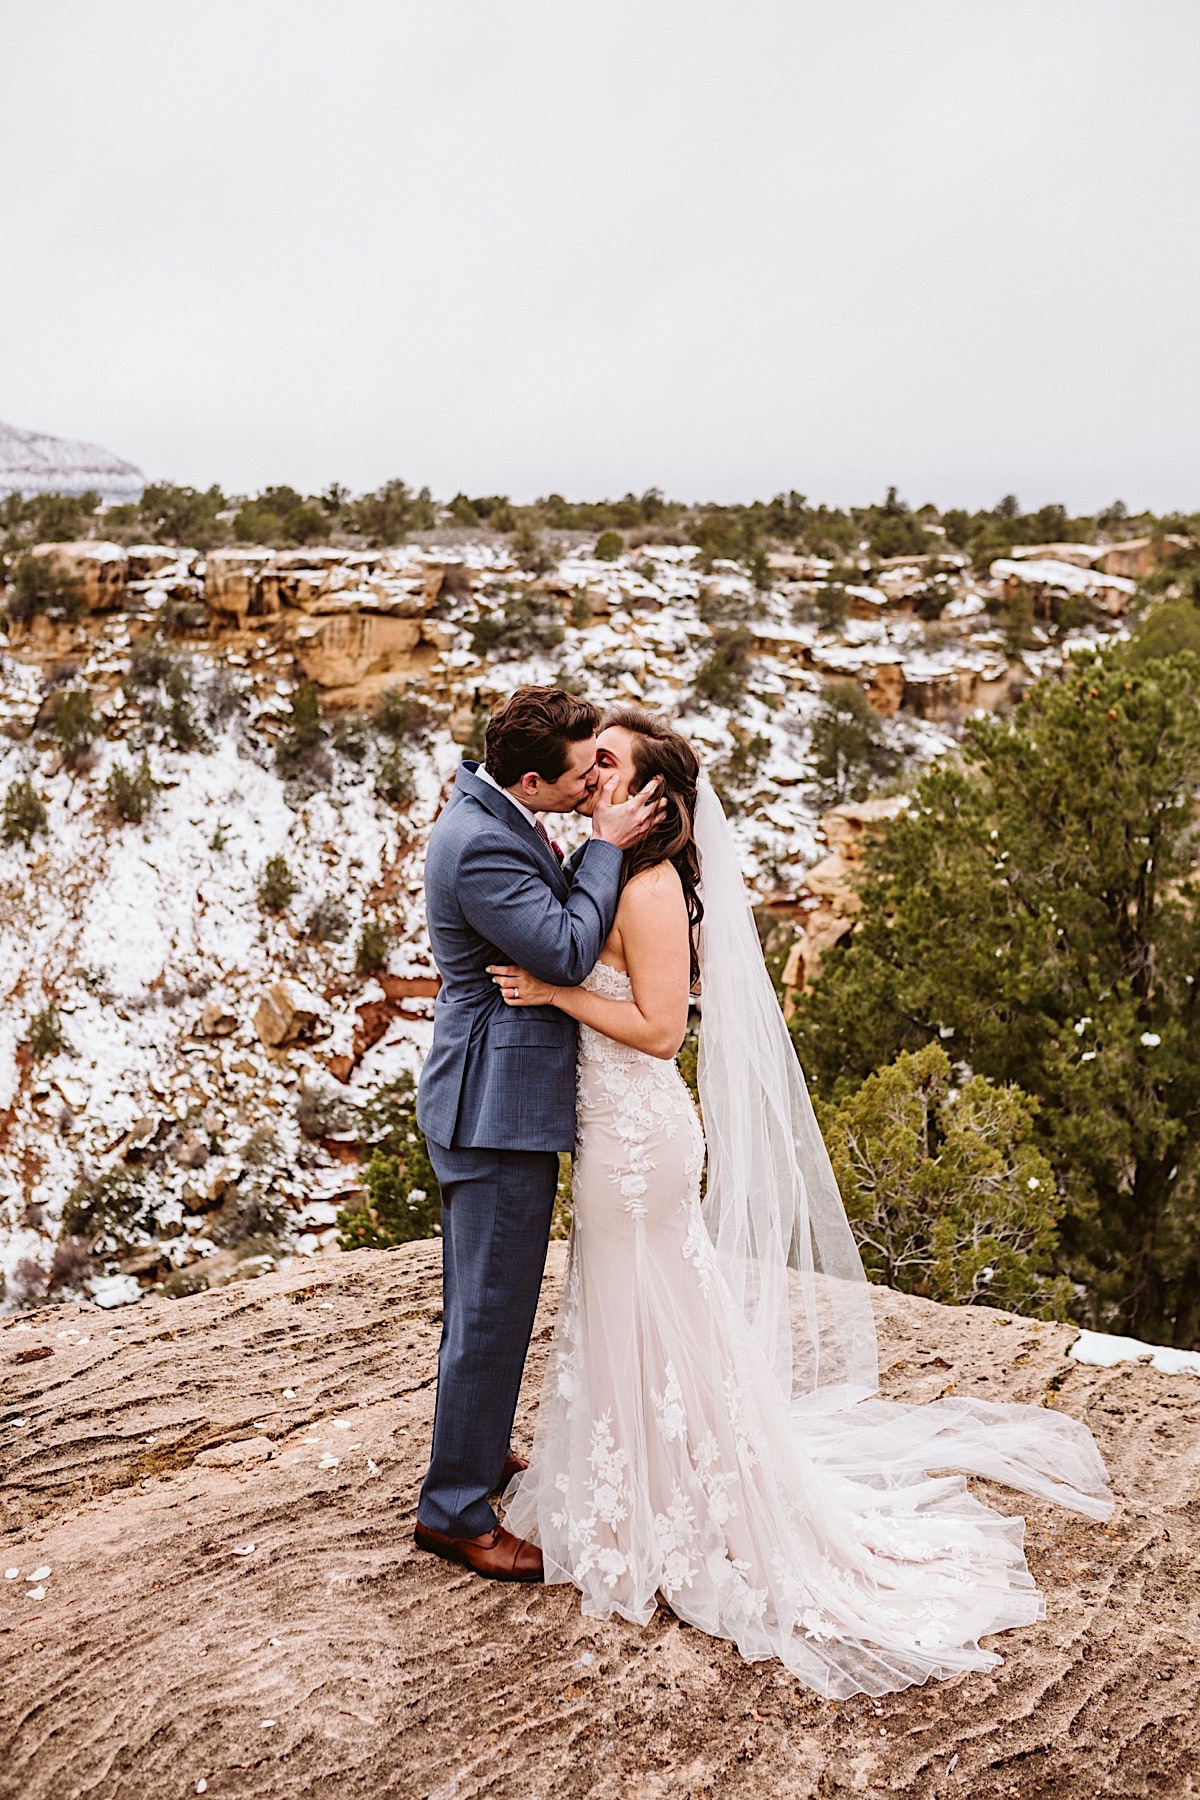 Bride and groom kiss on the edge of a cliff with a foggy snowy sky